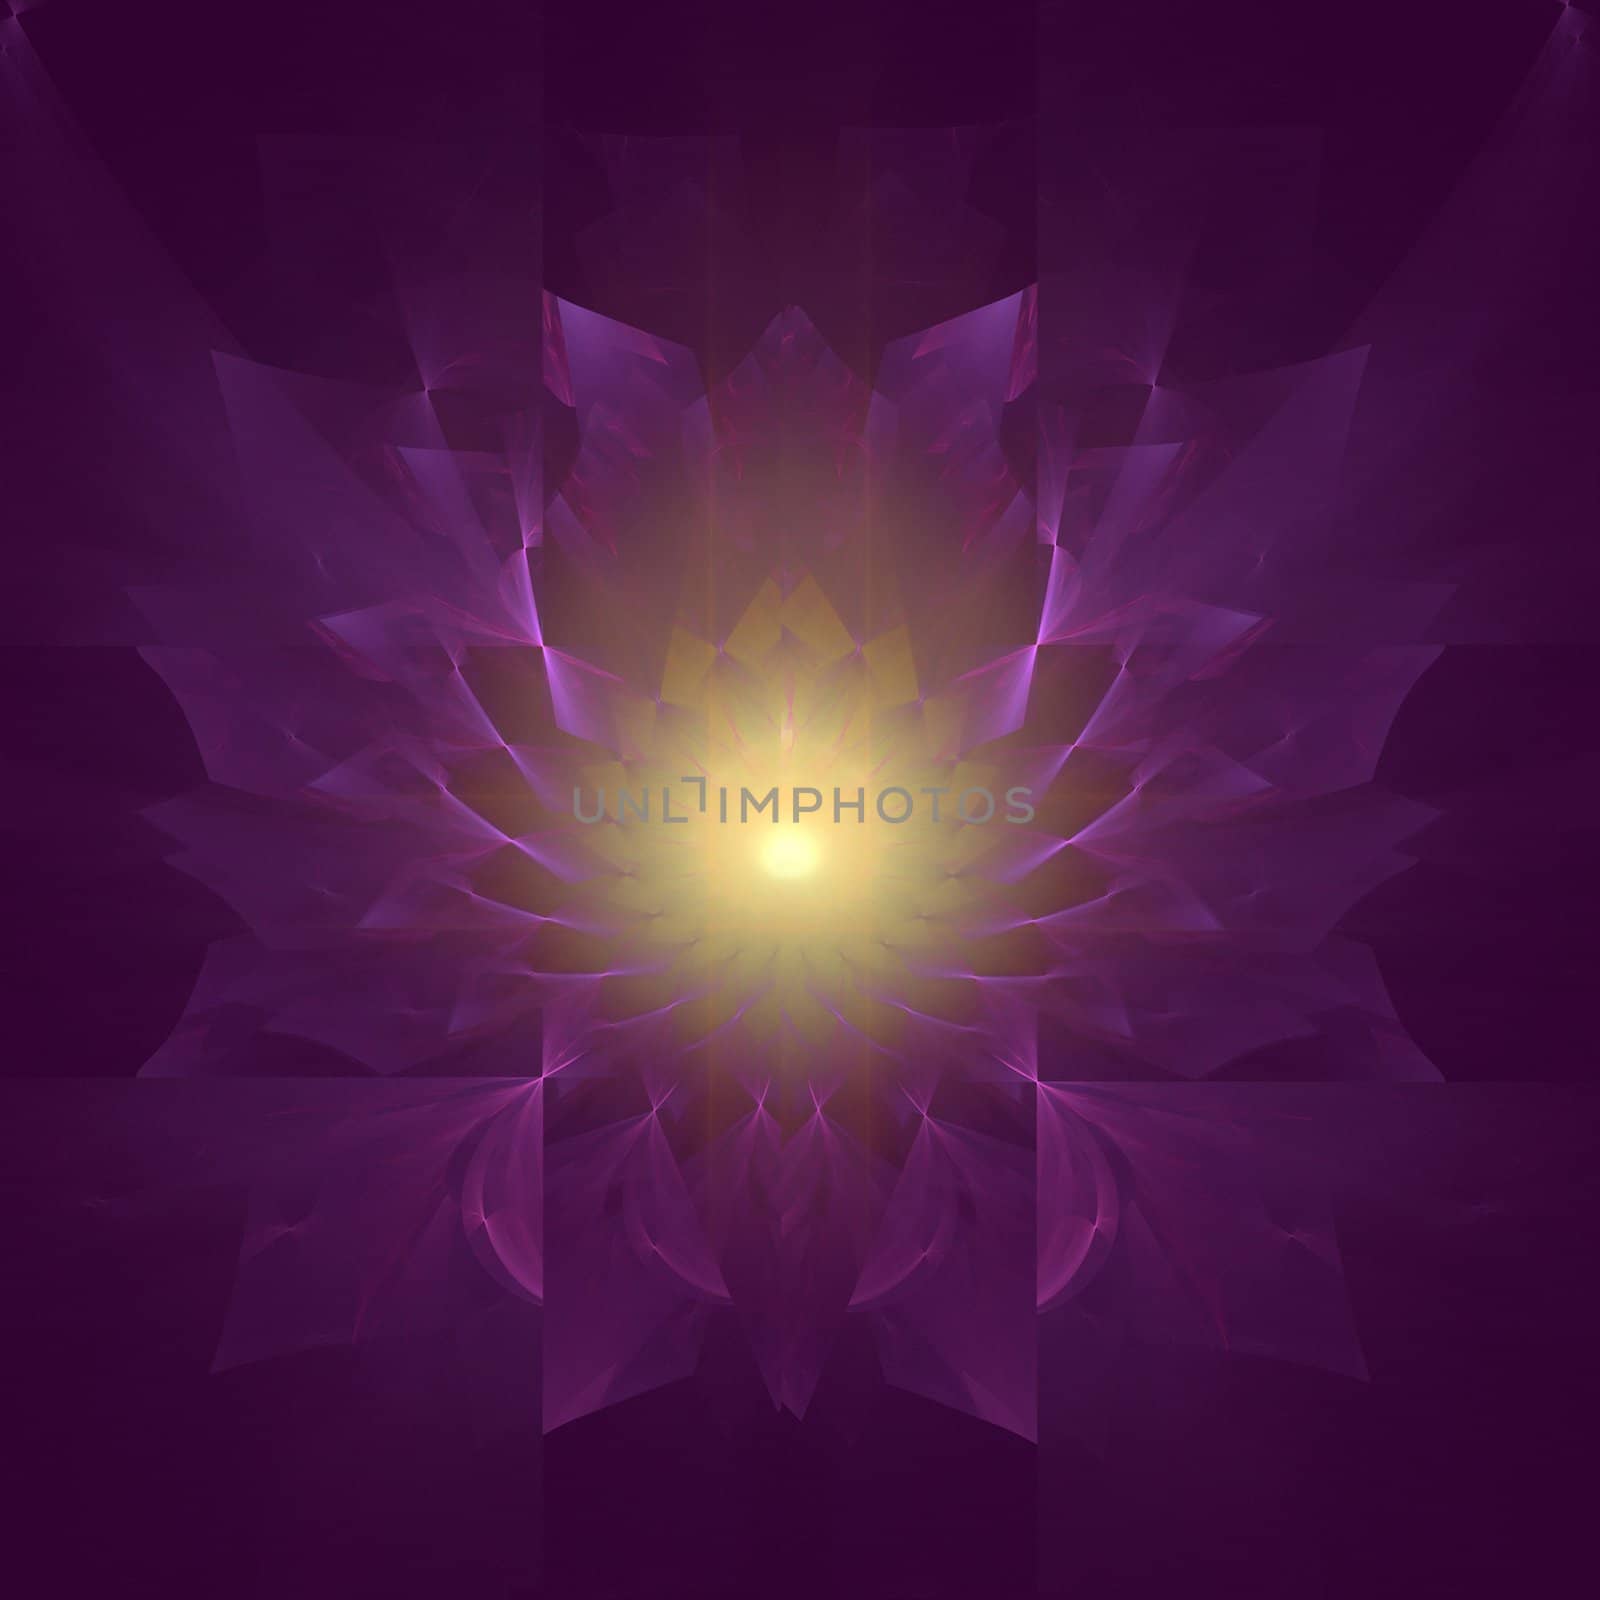 Abstract fractal design representing the mum flower with emphasis on the color purple.